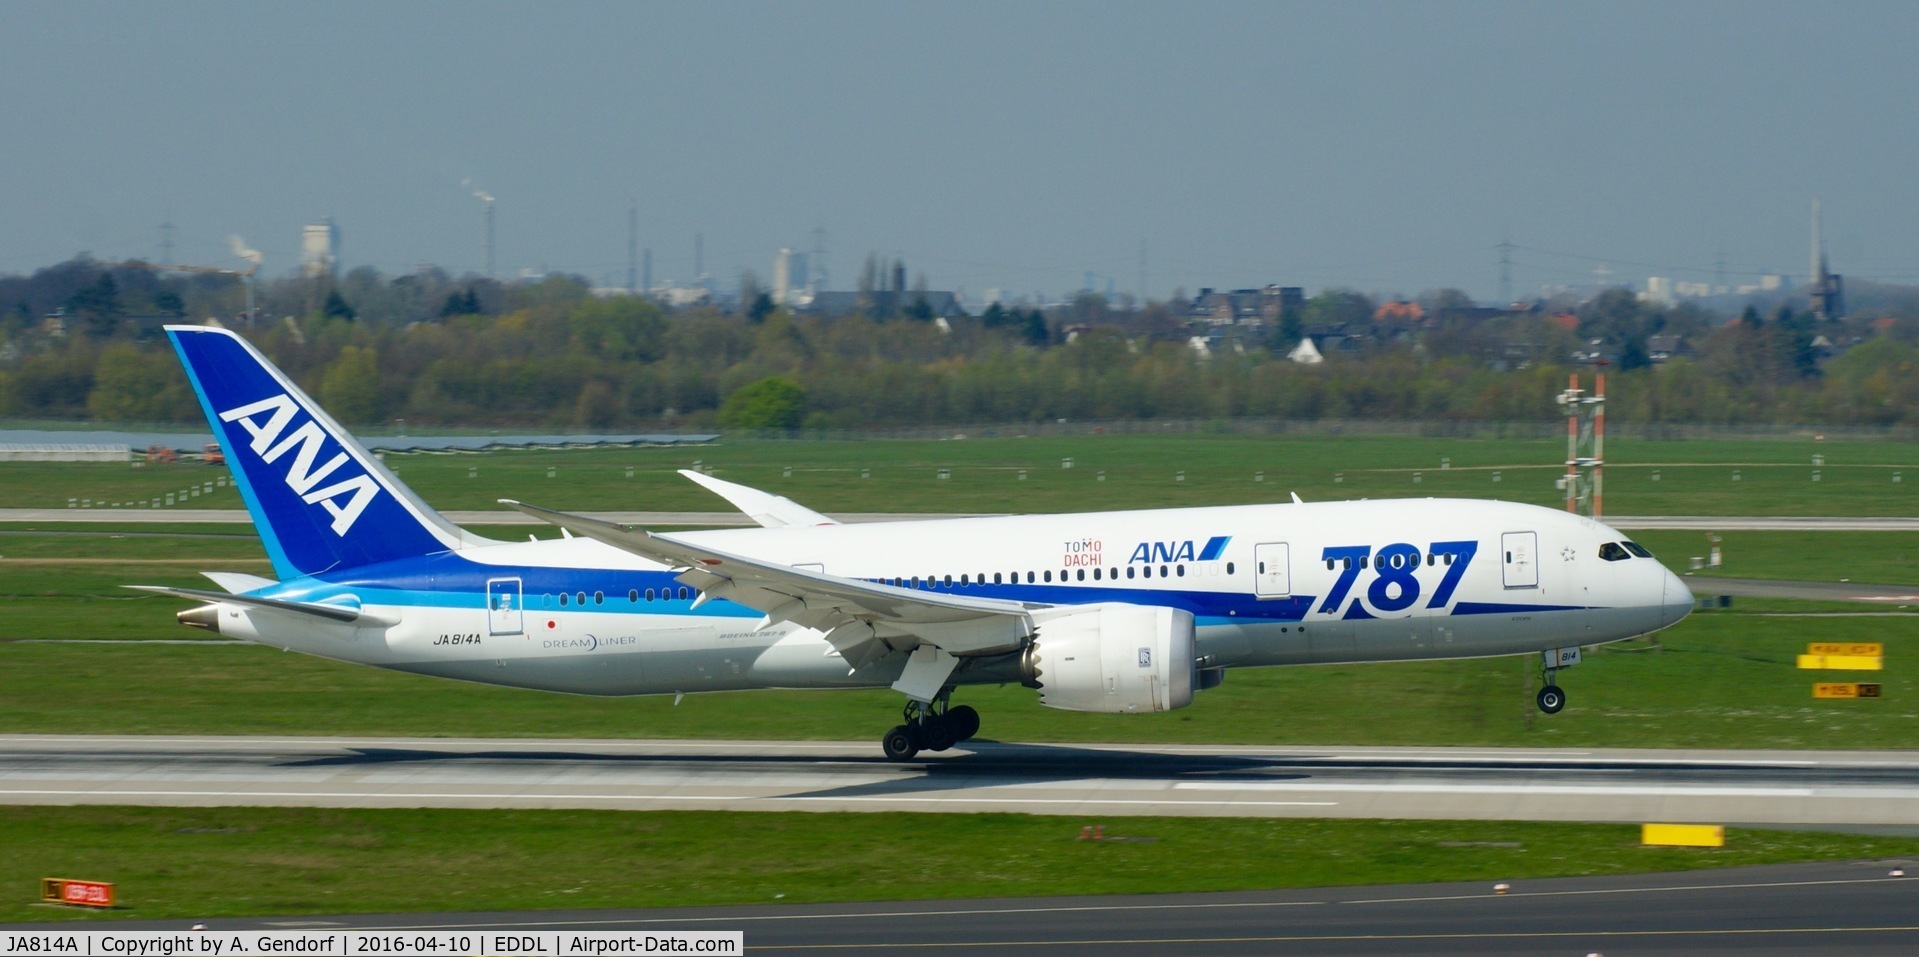 JA814A, 2012 Boeing 787-8 Dreamliner C/N 34493, ANA, is here smoothly touching down at Düsseldorf Int'l(EDDL)